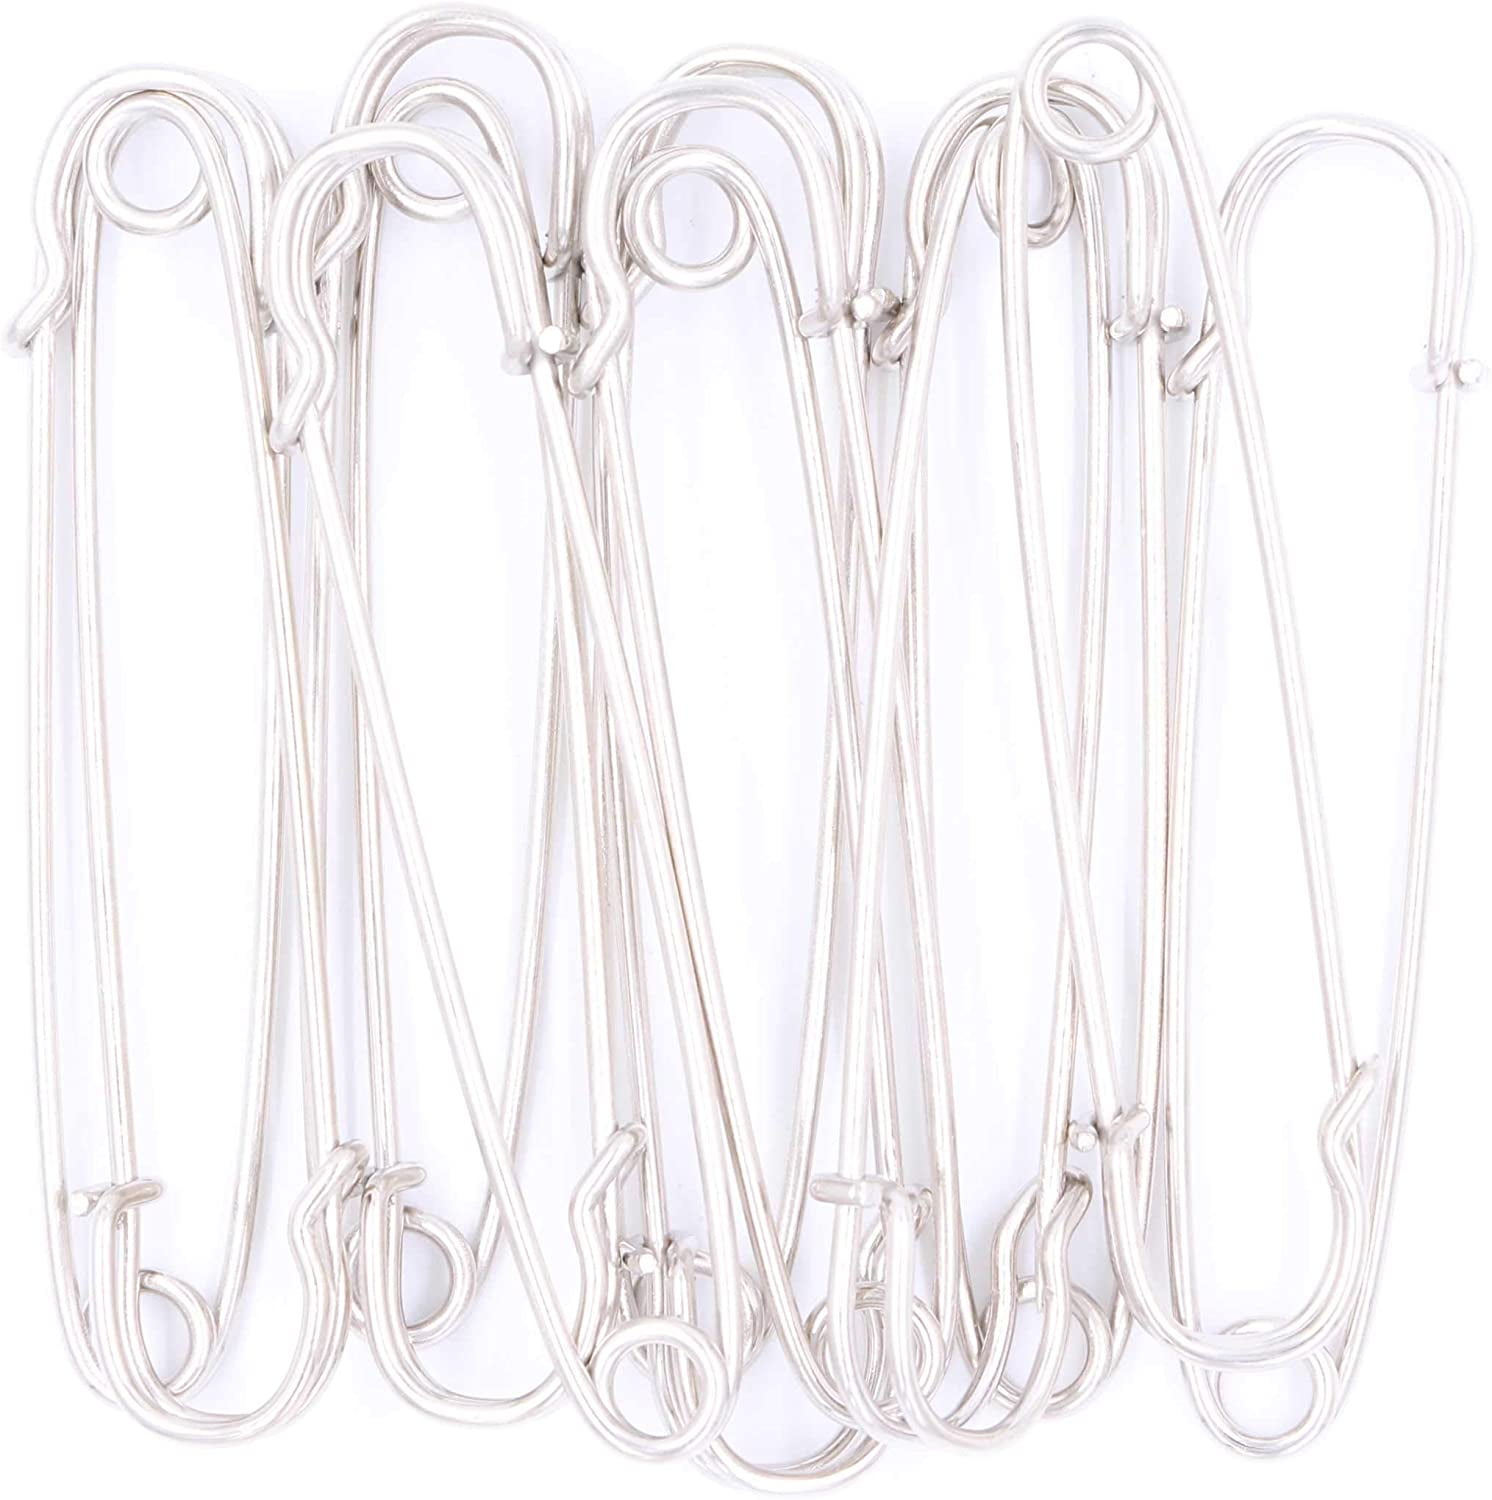 Large Safety Pins, Large Safety Pins Heavy Duty, Safety Pins for Clothes,  Blanket Safety Pins, 12 Pack Pins Assorted for Clothes, Leather, Crafts,  Canvas, Blank…